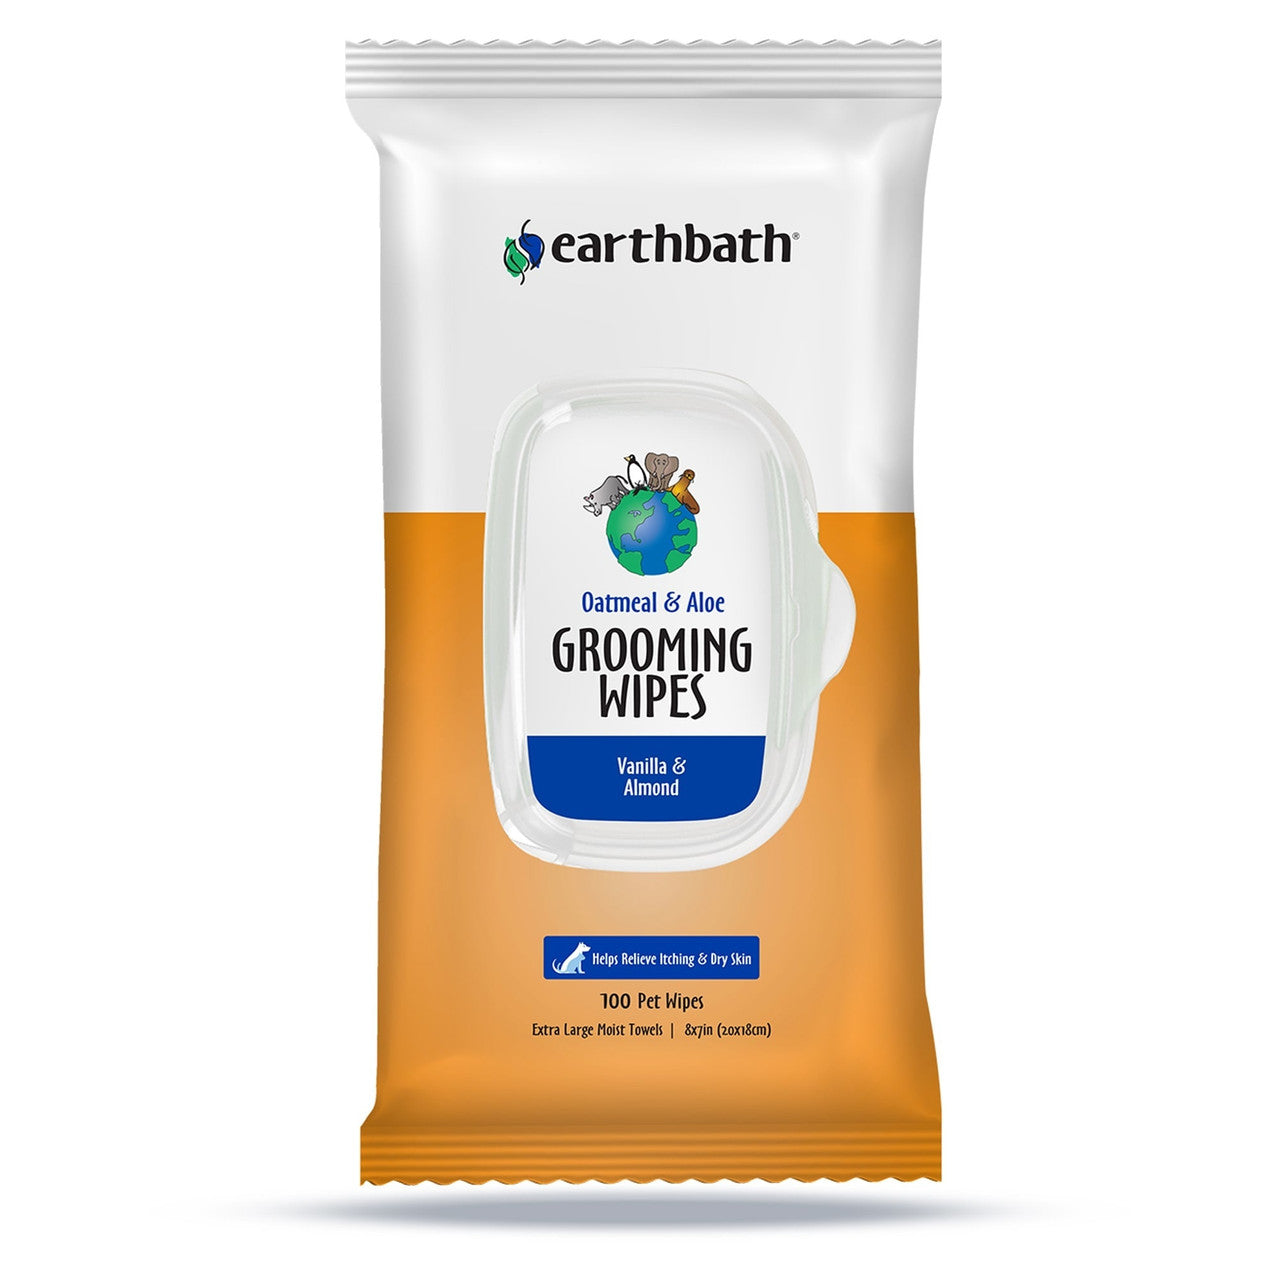 Earthbath Oatmeal & Aloe Grooming Wipes, Vanilla & Almond Soft-Sided Pouch 30ct